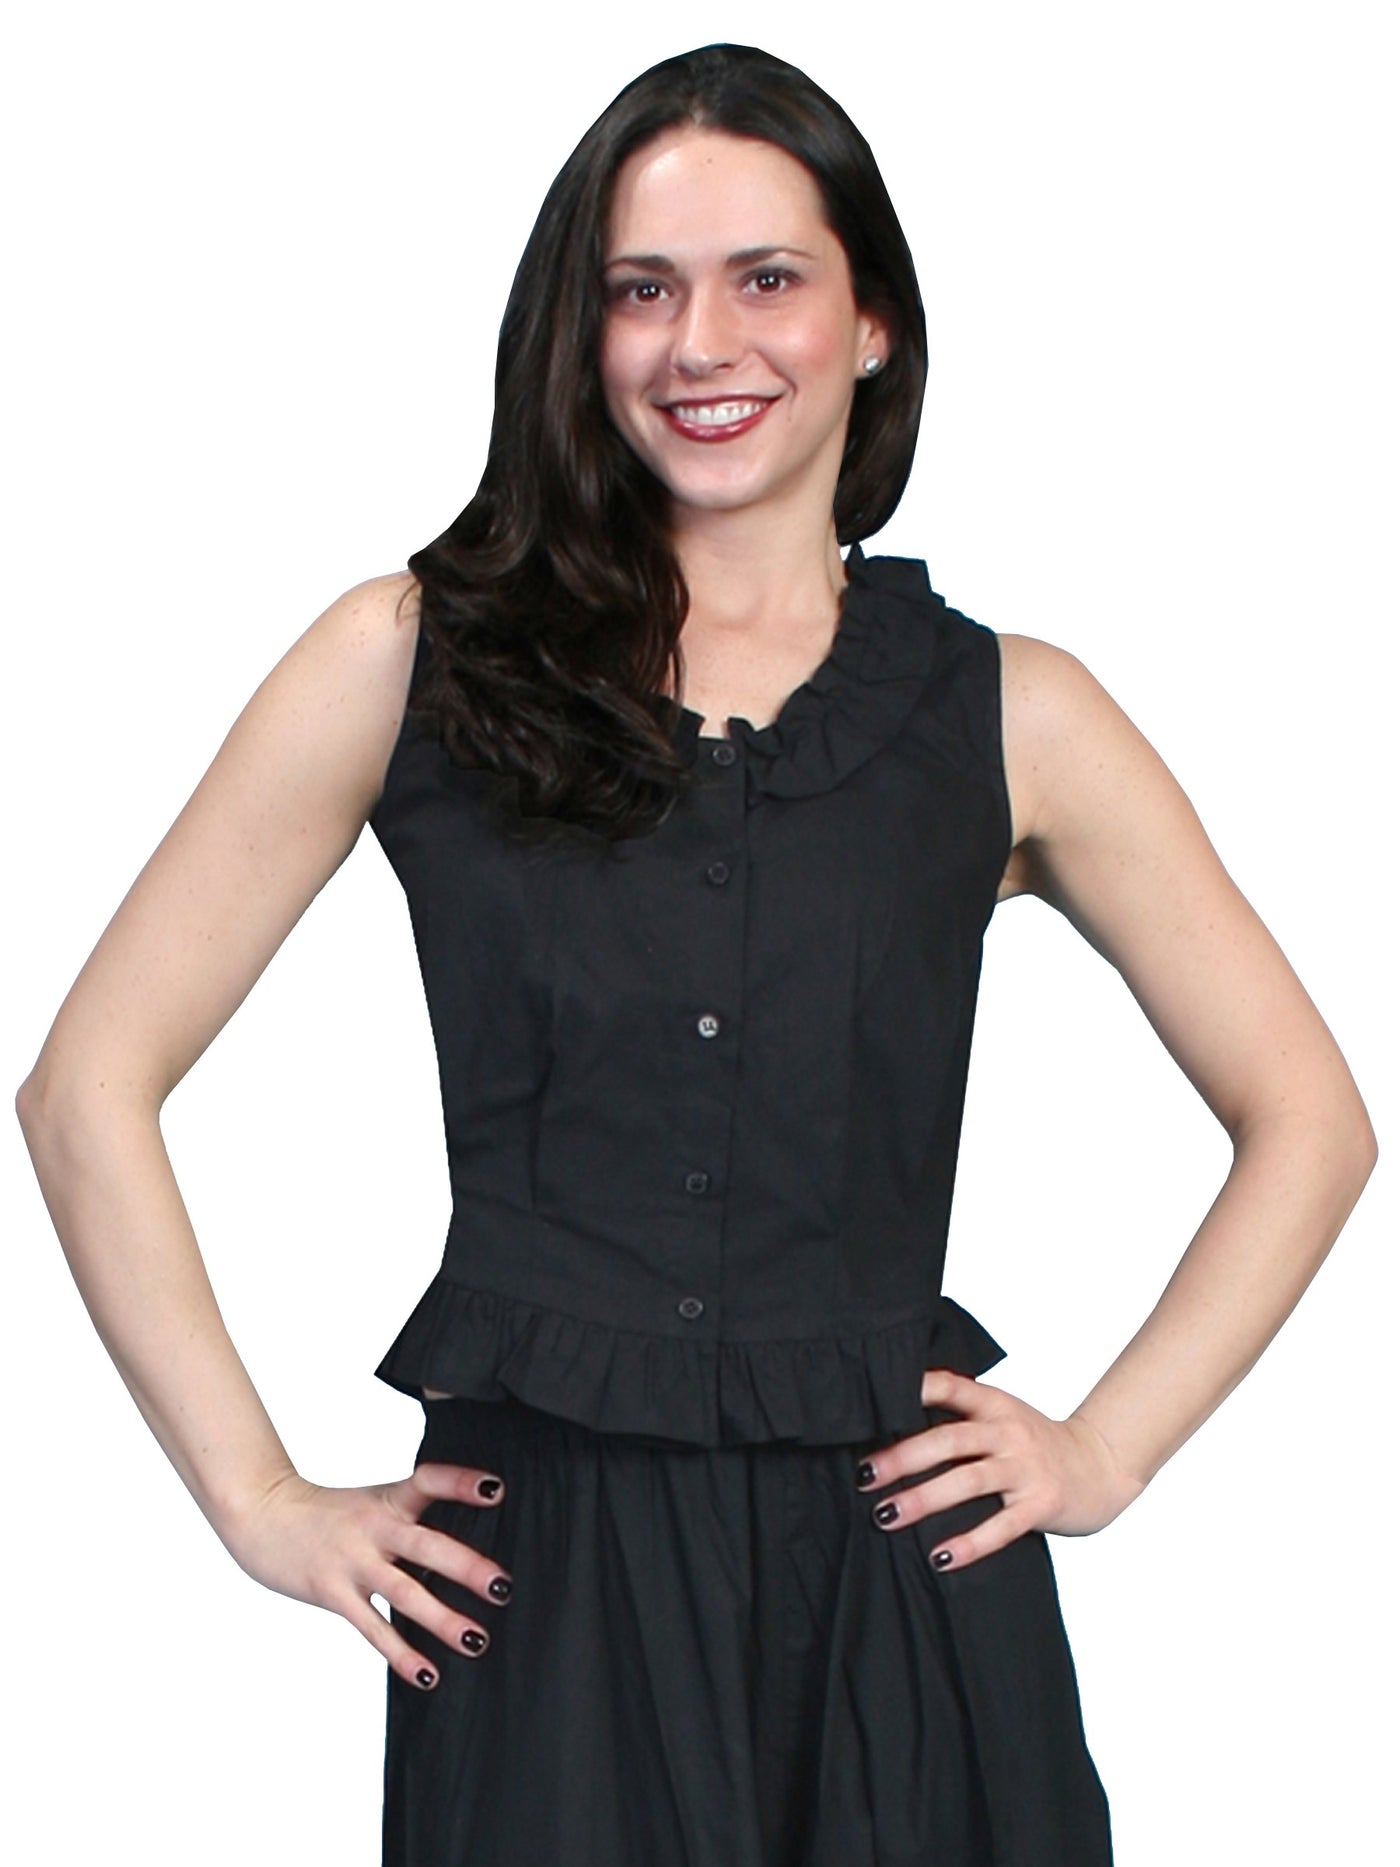 Western Style Ruffled Camisole in Black - SOLD OUT